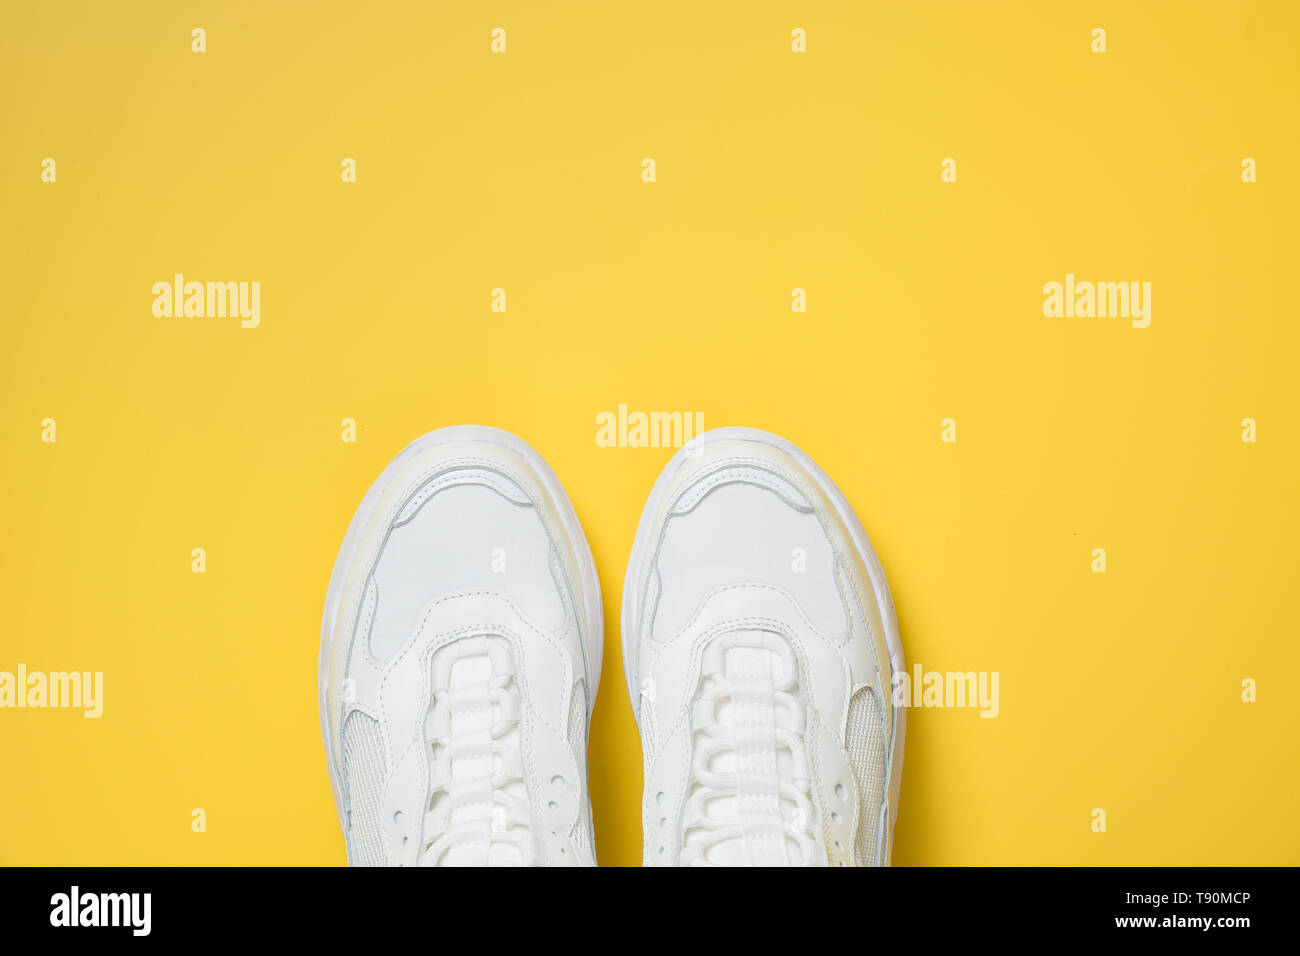 Pair of white female sneakers on yellow. Flat lay, top view minimal background. Magazine concept. Stock Photo